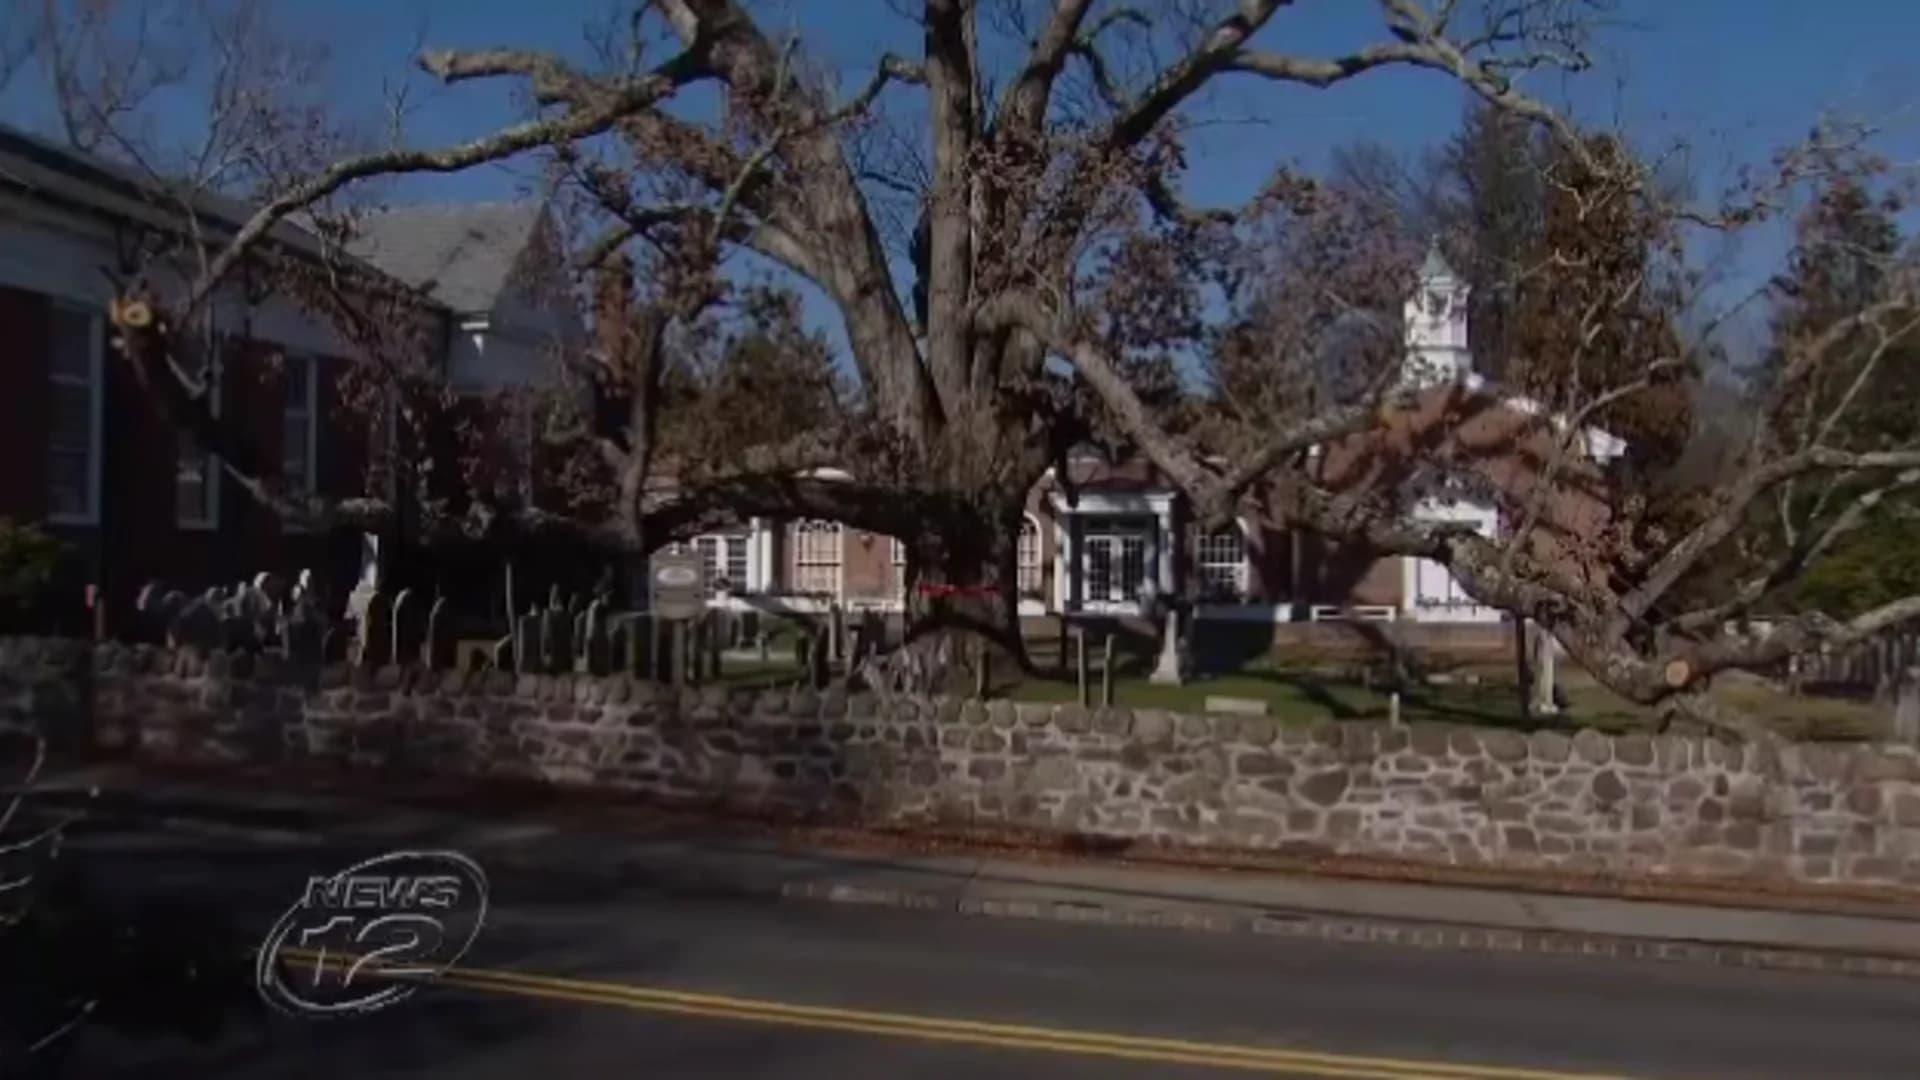 600-year-old tree to be removed in Bernards